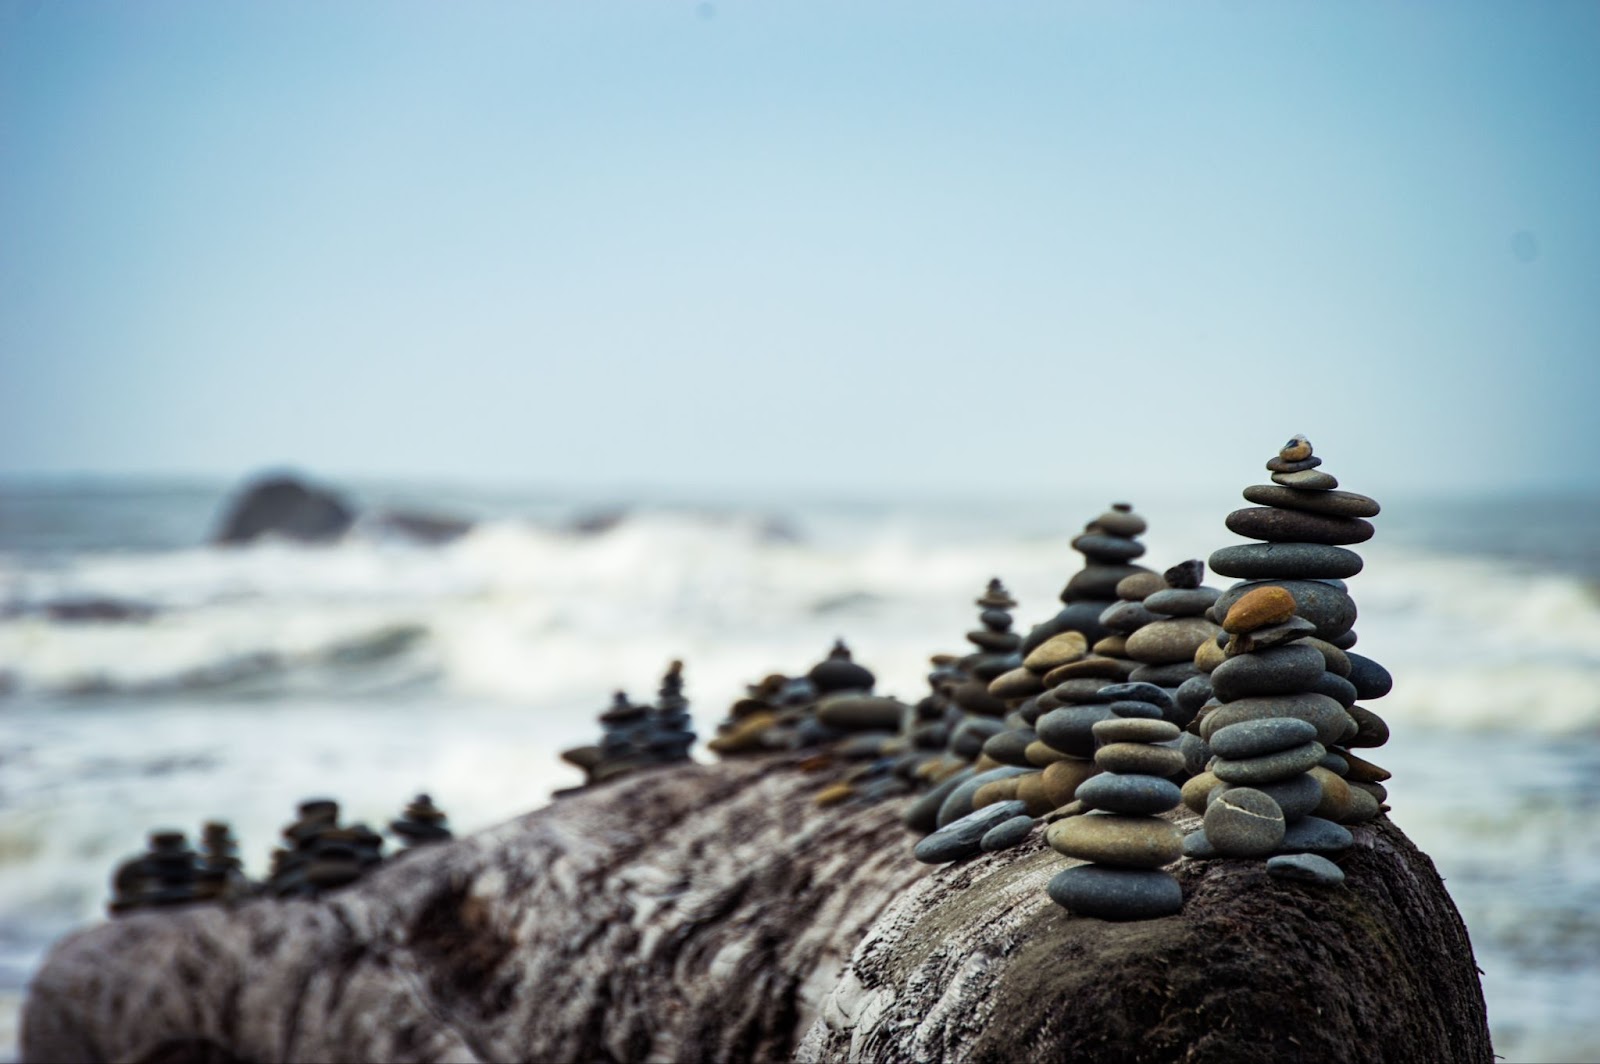 Multiple stacks of rocks on a large rock in along the ocean shore.